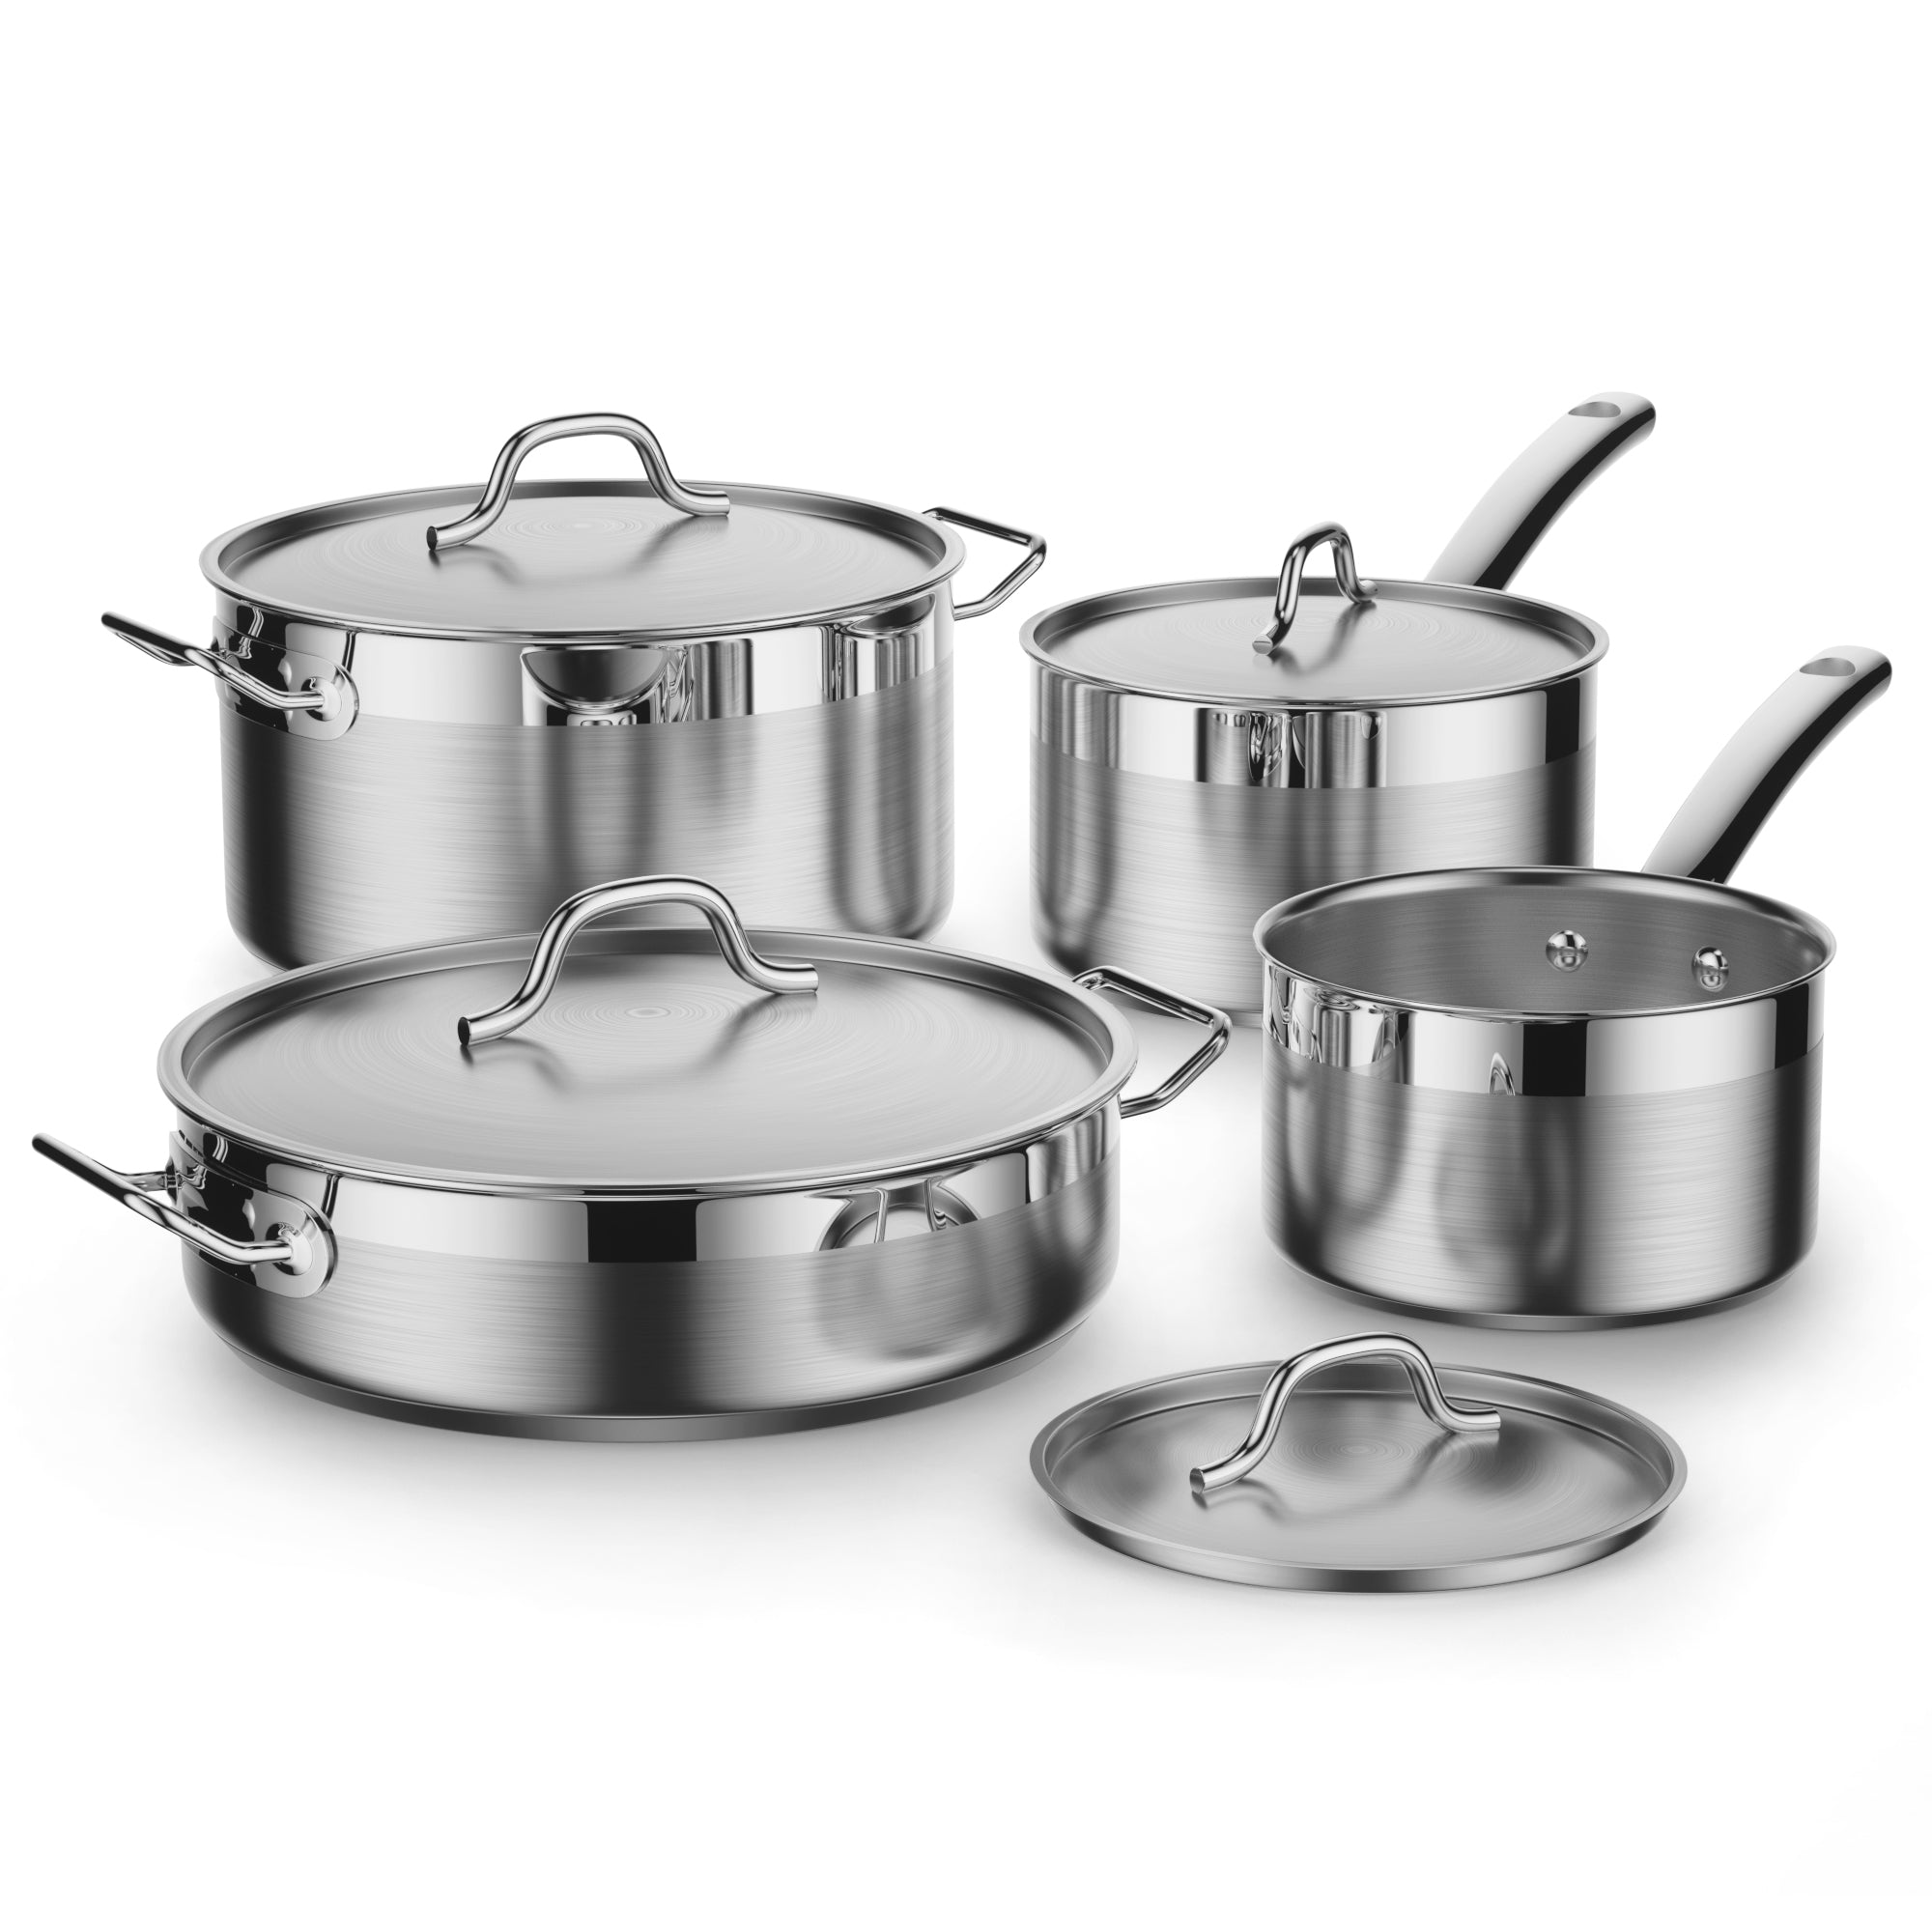 Cooks Standard Kitchen Cookware Sets Stainless Steel, Professional Pot